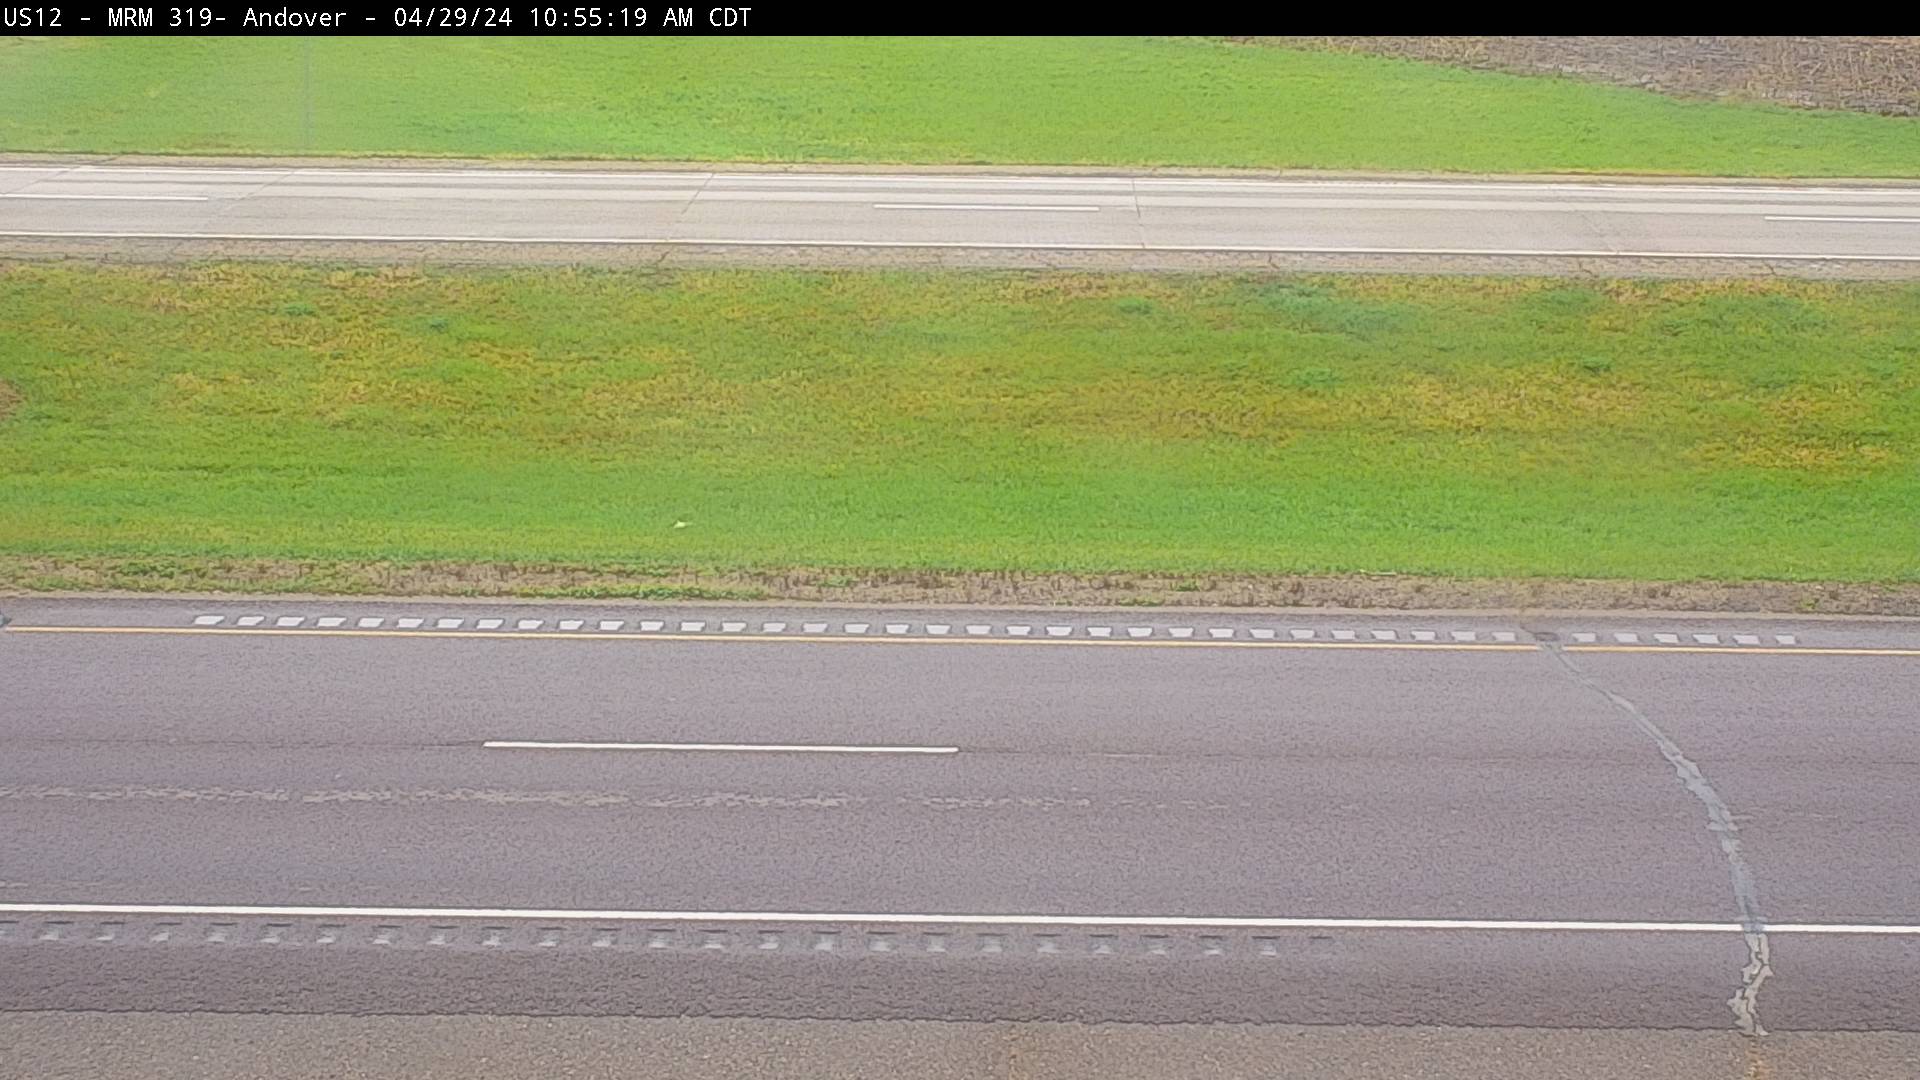 Traffic Cam North of town along US-12 - Northeast Player